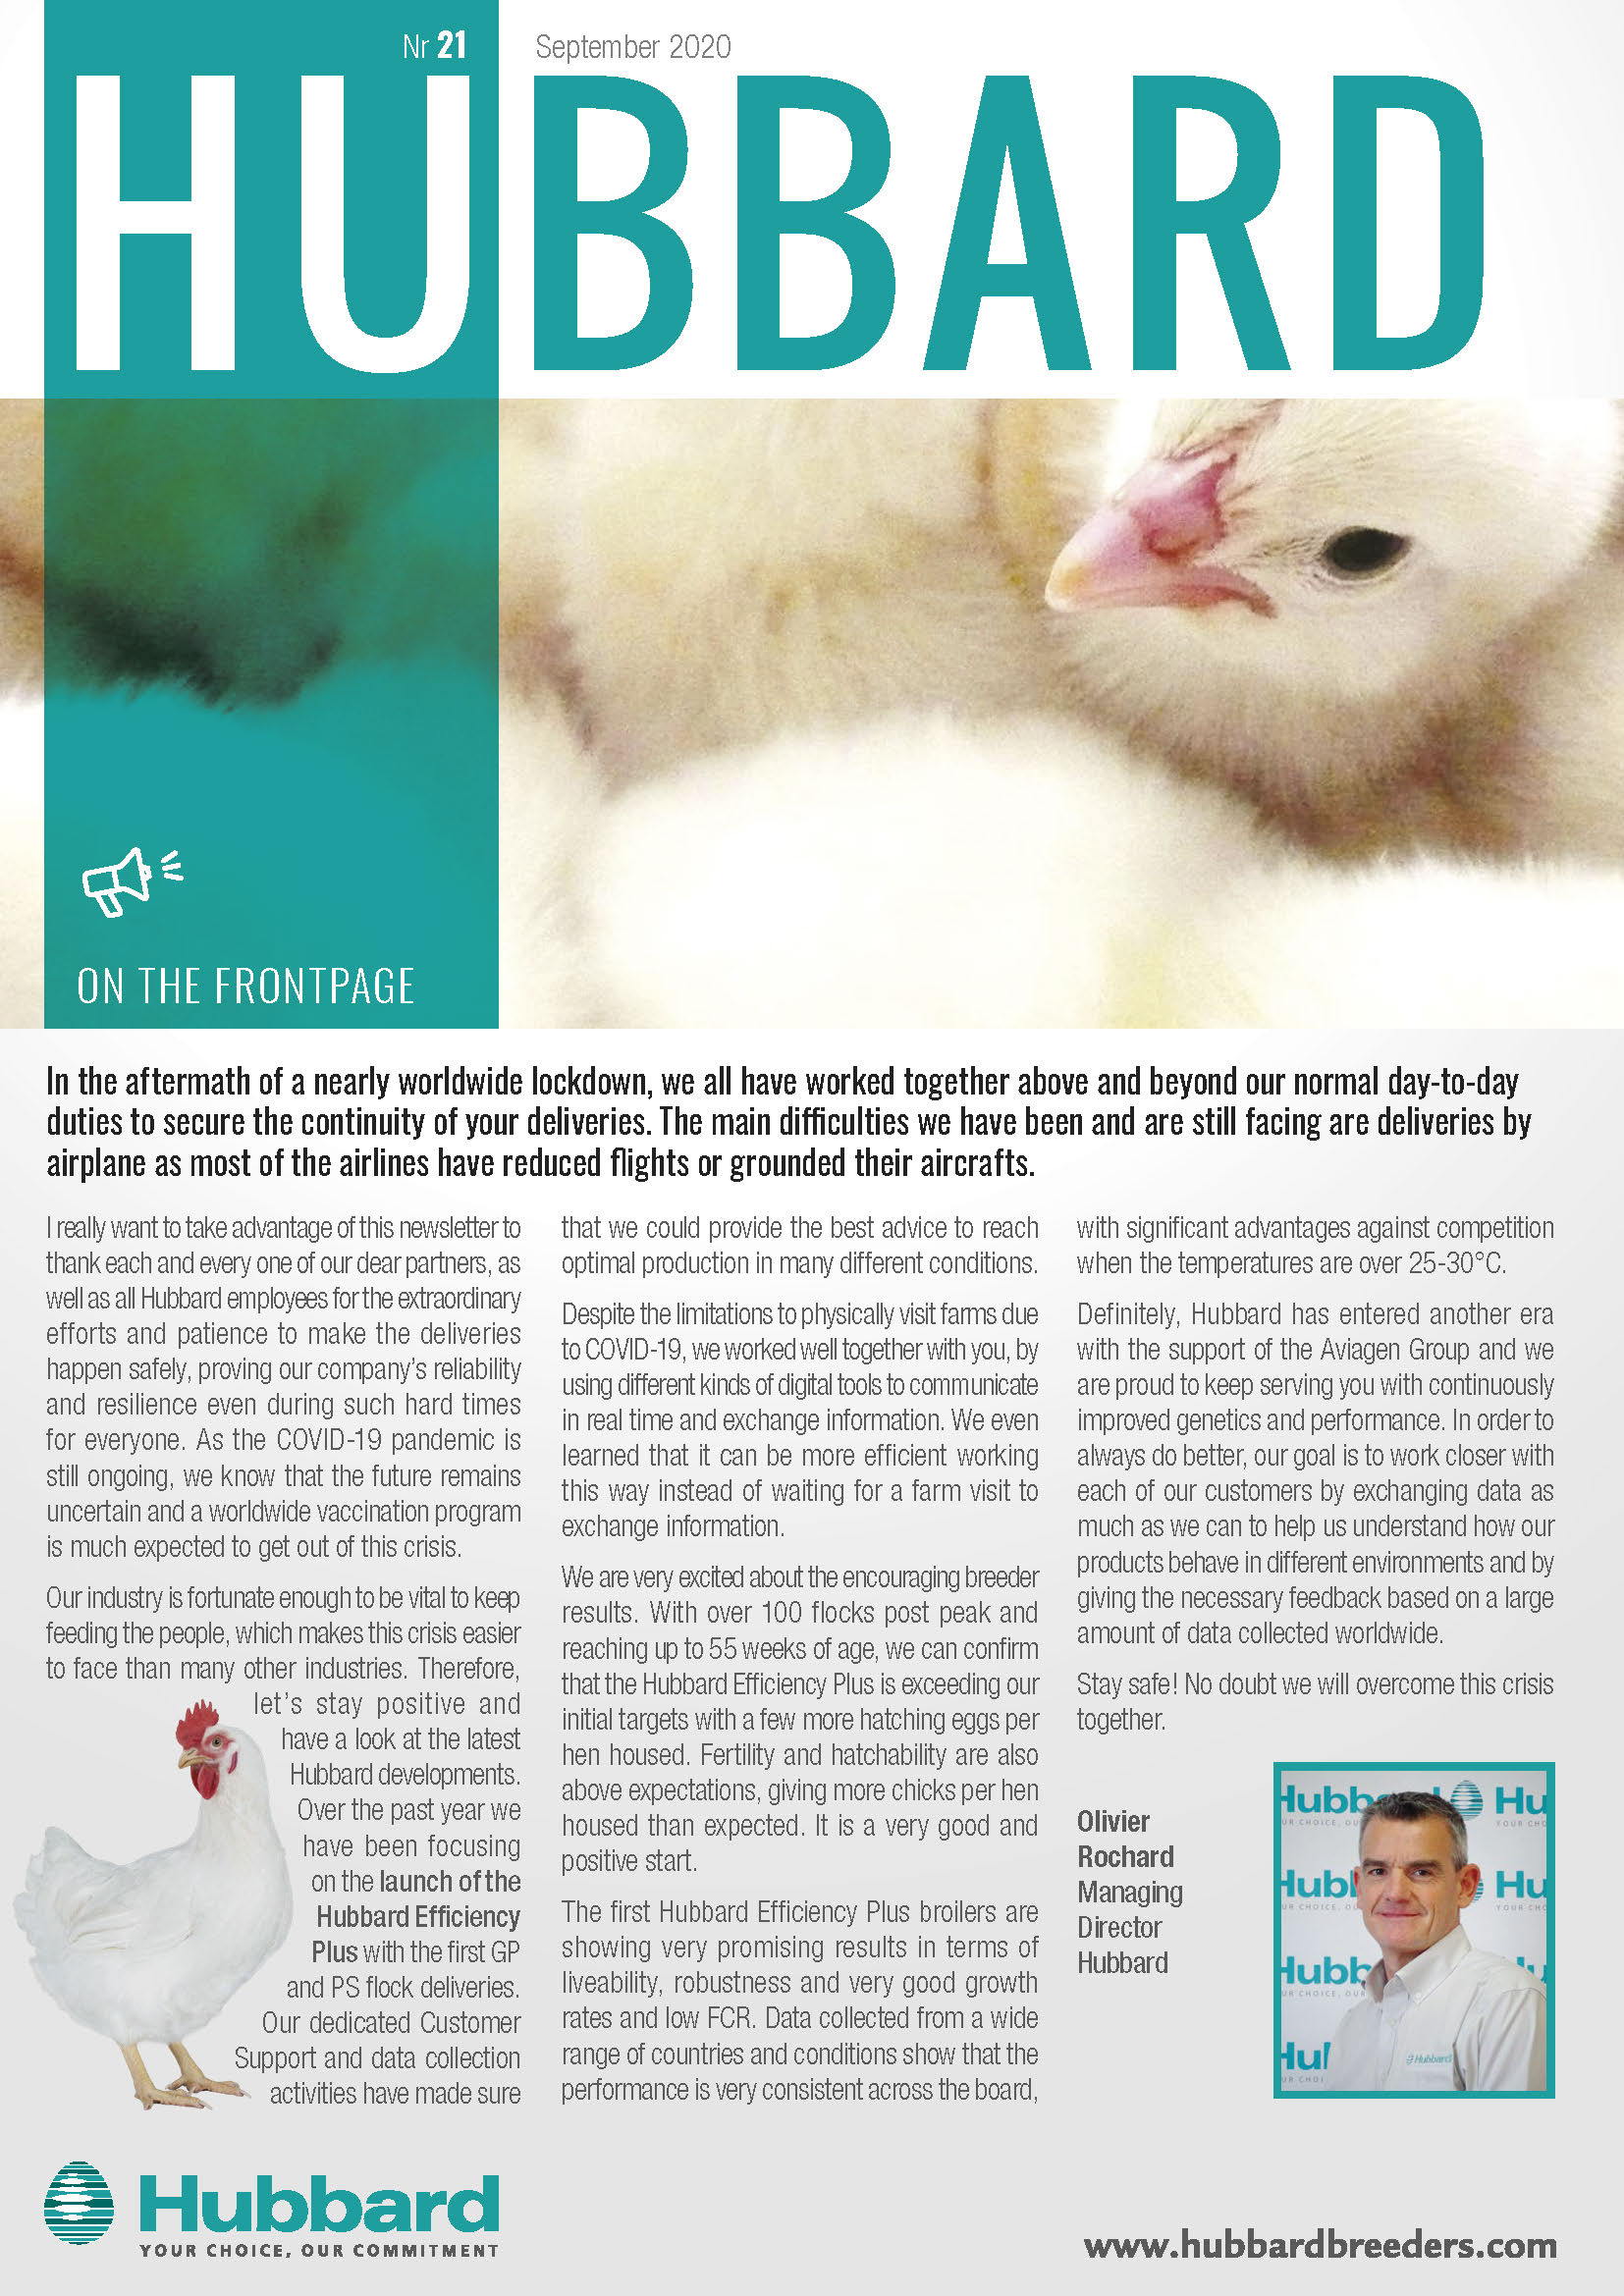 EN_Hubbard Newsletter Edition 20_September 2020 (English)_Page_1